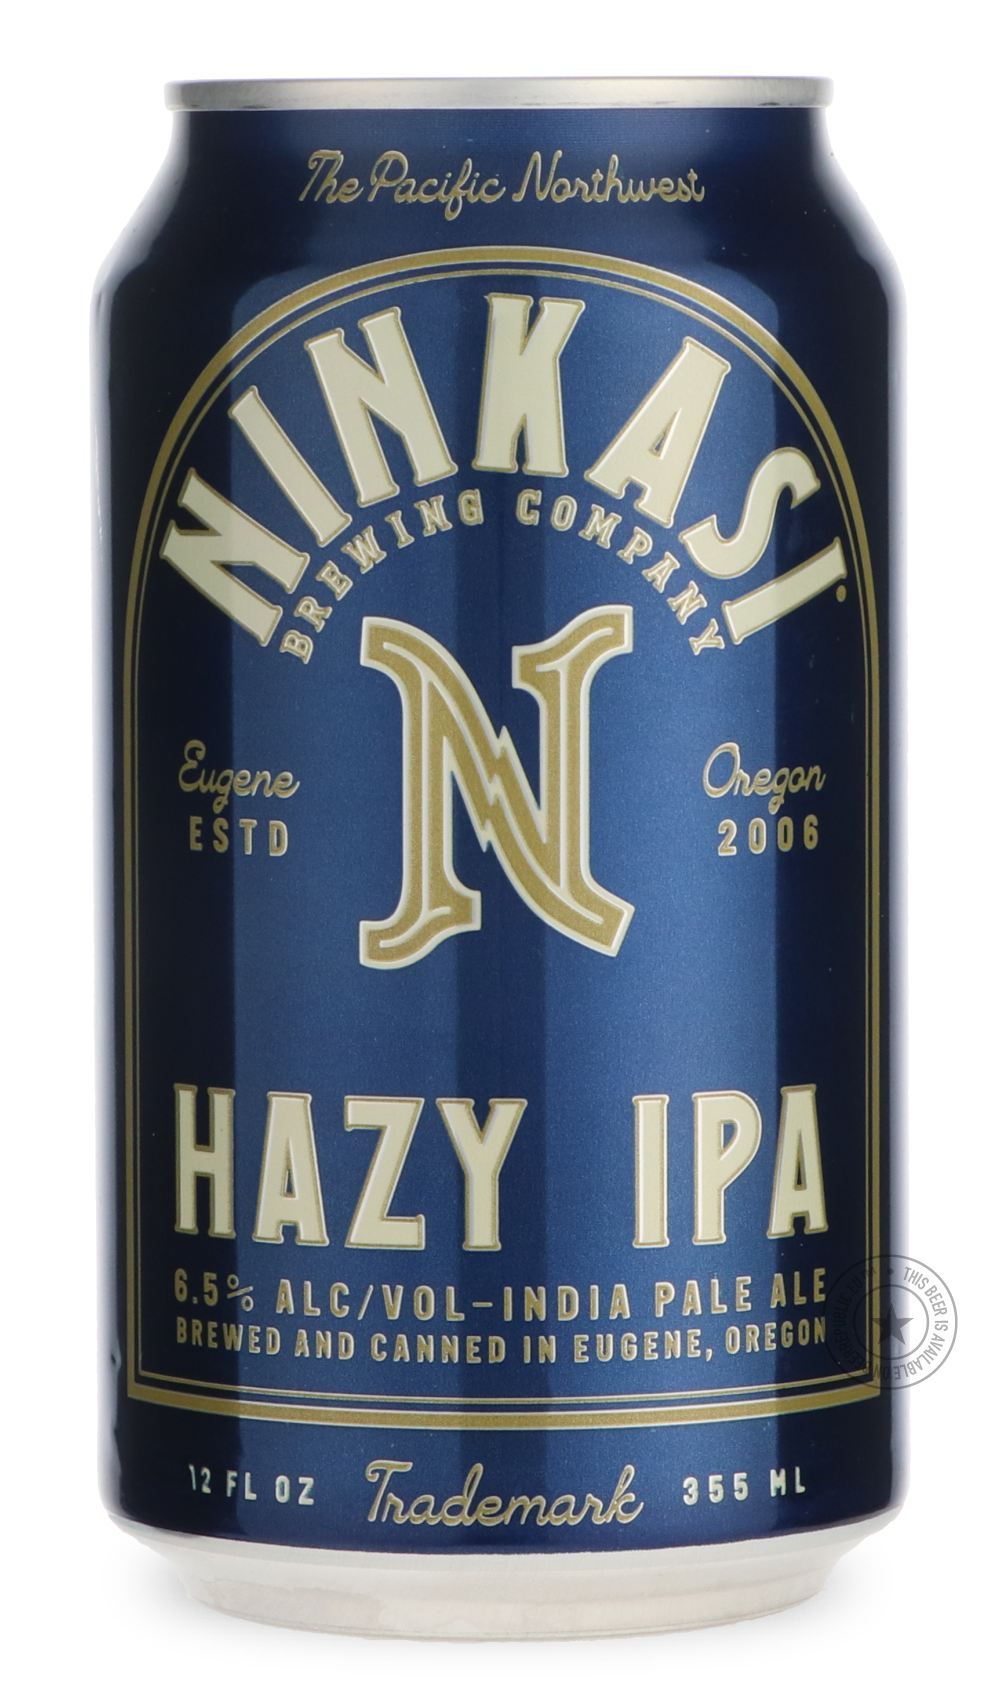 -Ninkasi- Hazy IPA-IPA- Only @ Beer Republic - The best online beer store for American & Canadian craft beer - Buy beer online from the USA and Canada - Bier online kopen - Amerikaans bier kopen - Craft beer store - Craft beer kopen - Amerikanisch bier kaufen - Bier online kaufen - Acheter biere online - IPA - Stout - Porter - New England IPA - Hazy IPA - Imperial Stout - Barrel Aged - Barrel Aged Imperial Stout - Brown - Dark beer - Blond - Blonde - Pilsner - Lager - Wheat - Weizen - Amber - Barley Wine - 